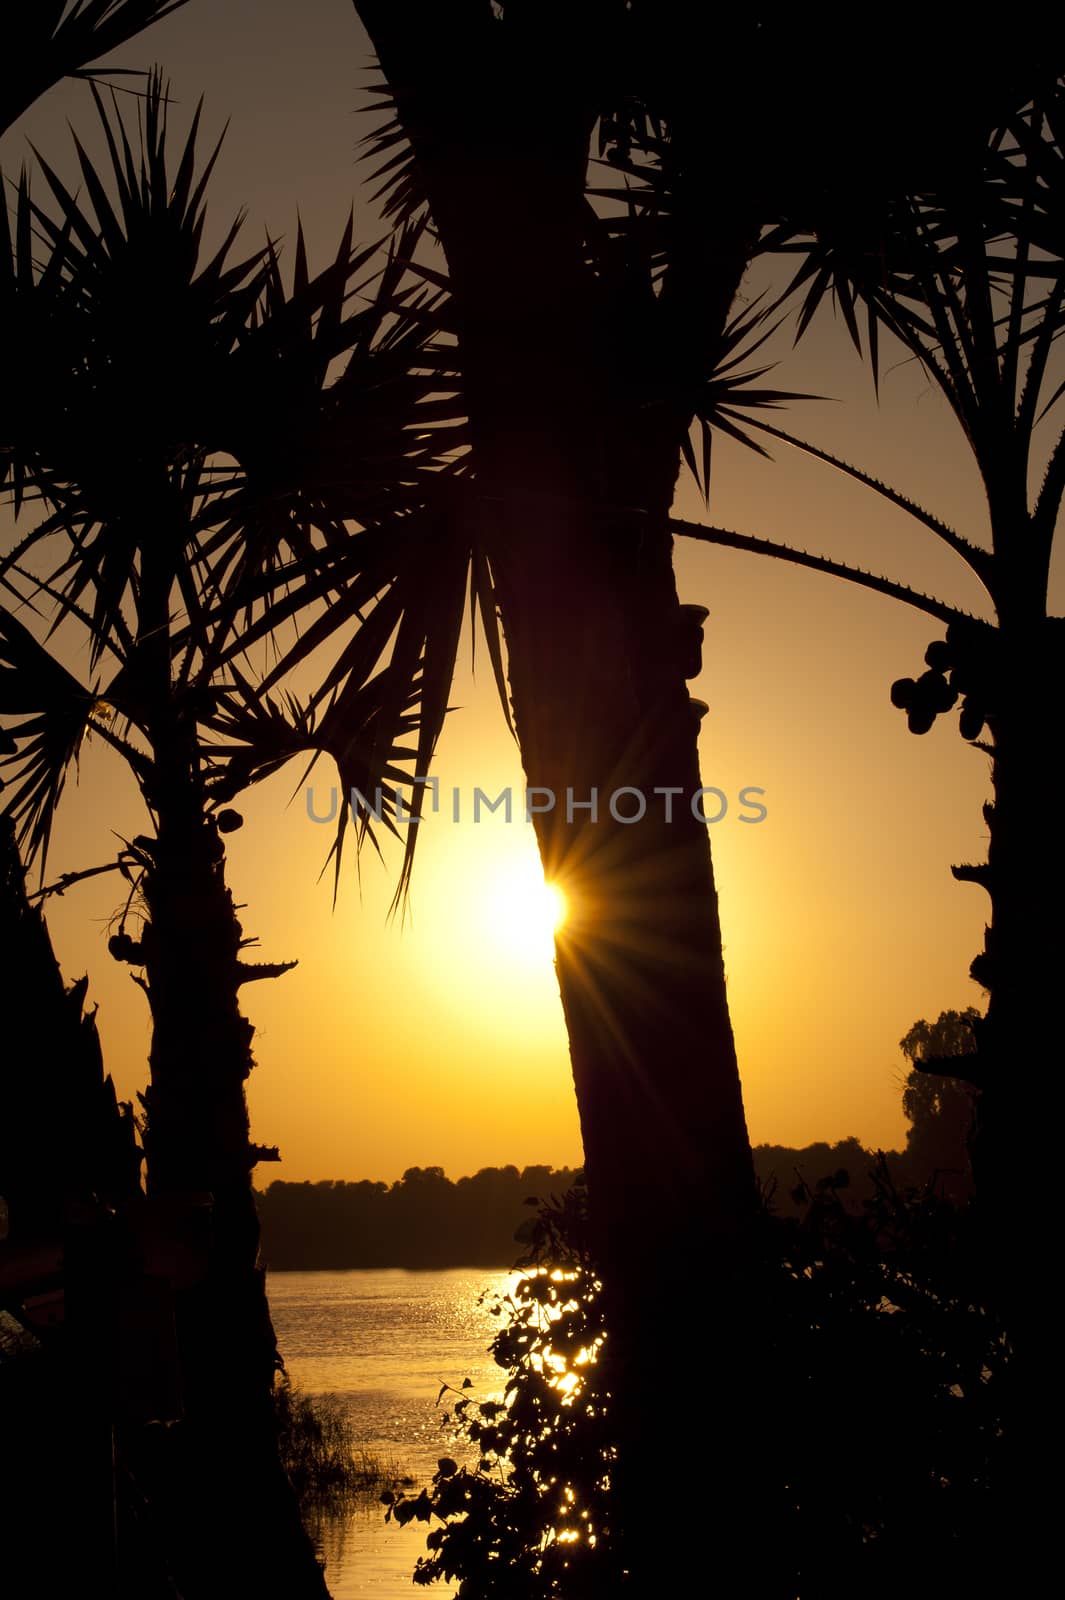 An orange sunset through the branches of tropical palm trees with river in the background